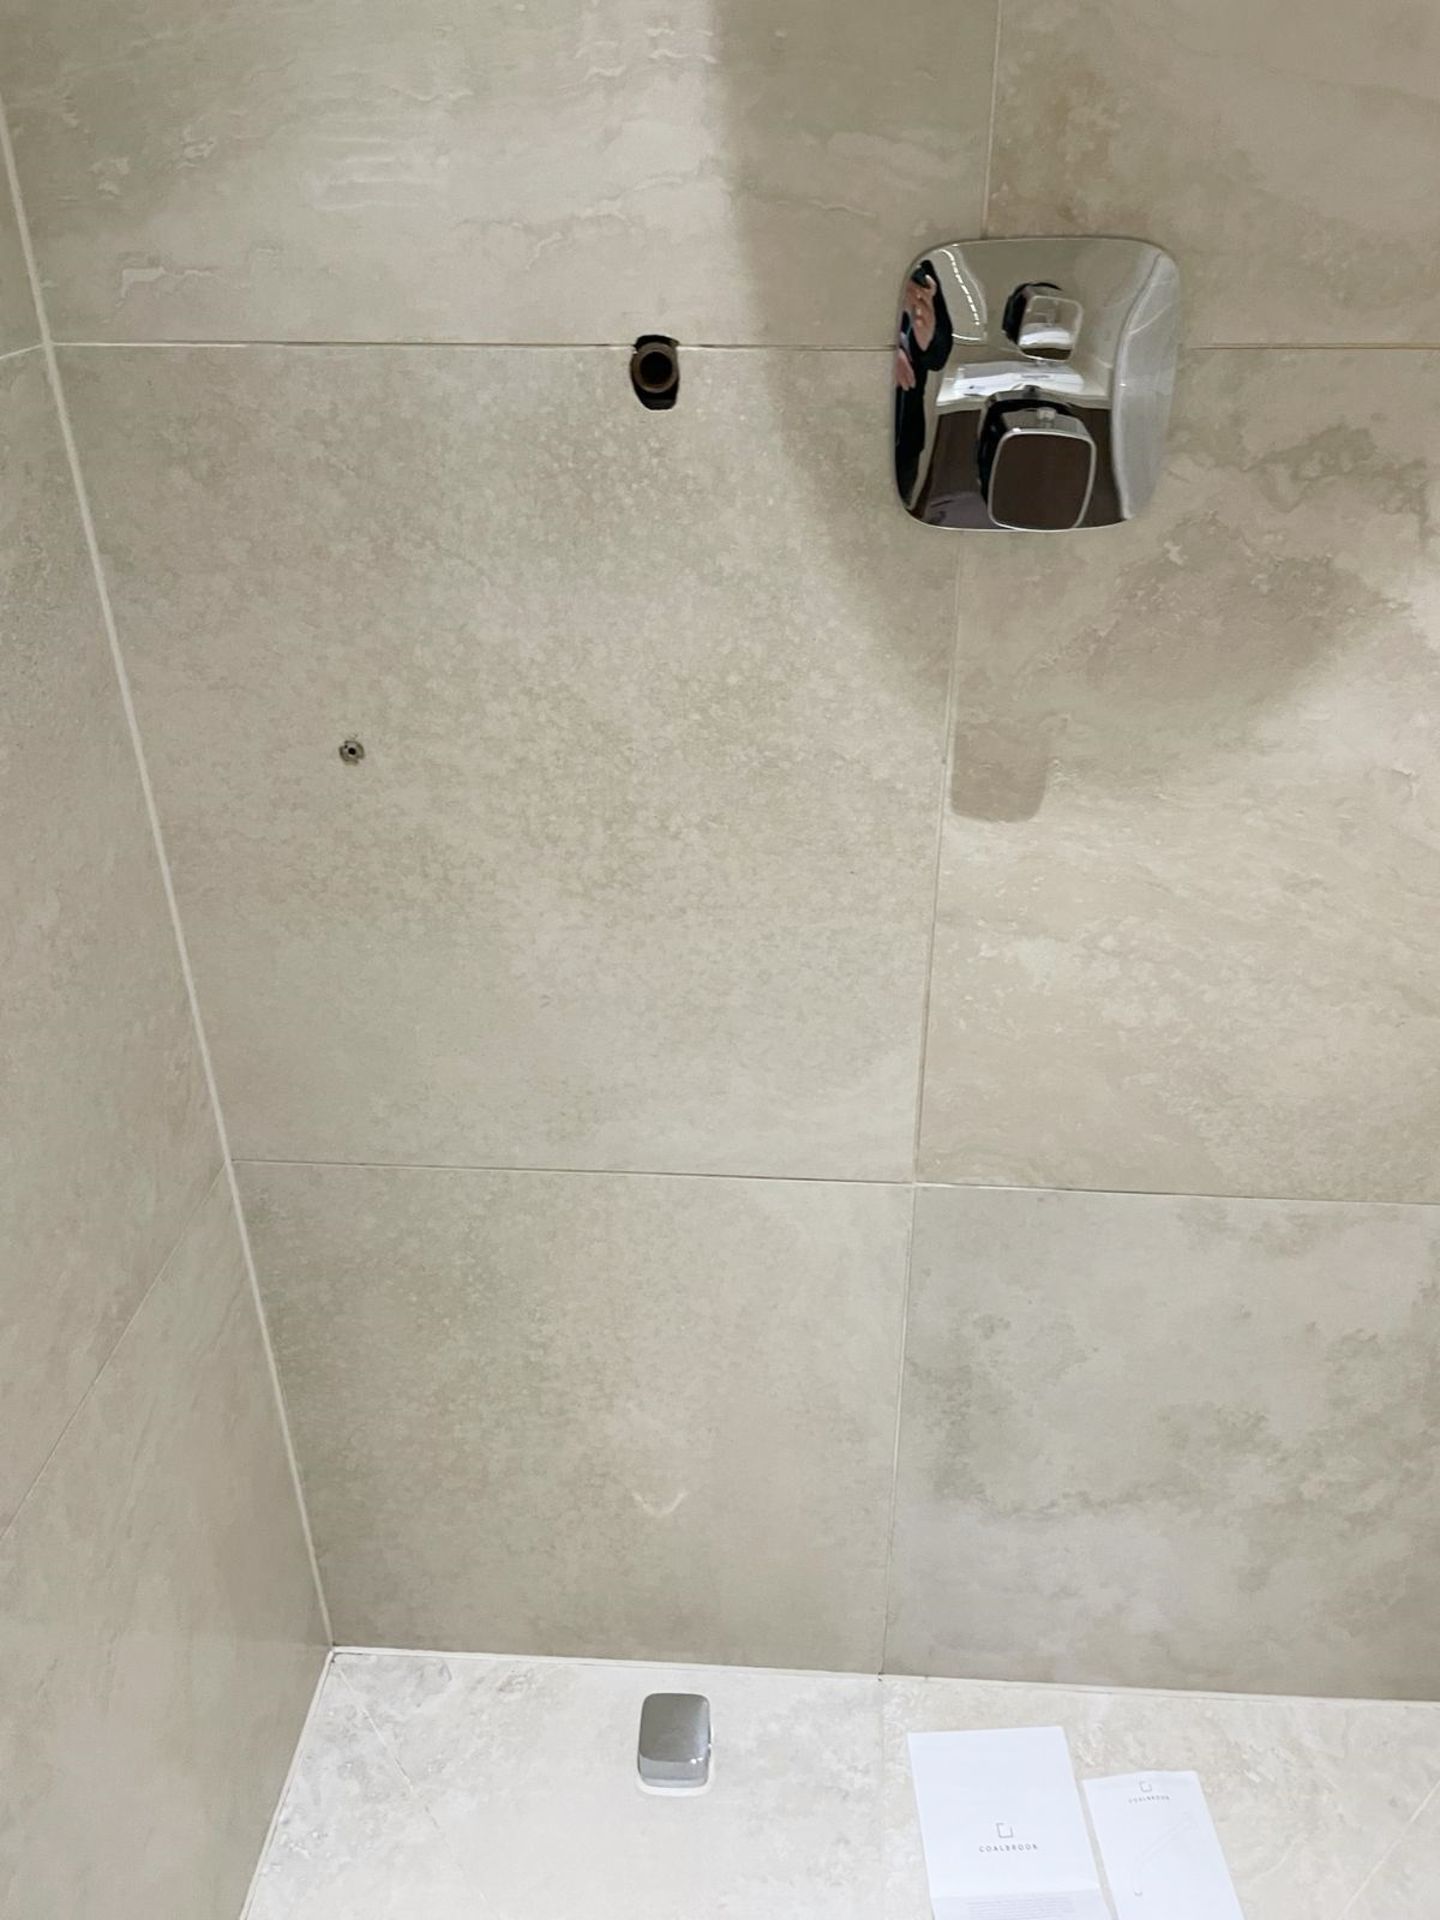 1 x Premium Shower and Enclosure + hansgrohe Controls and Thermostat - Ref: PAN251 / Bed2bth - CL896 - Image 15 of 15